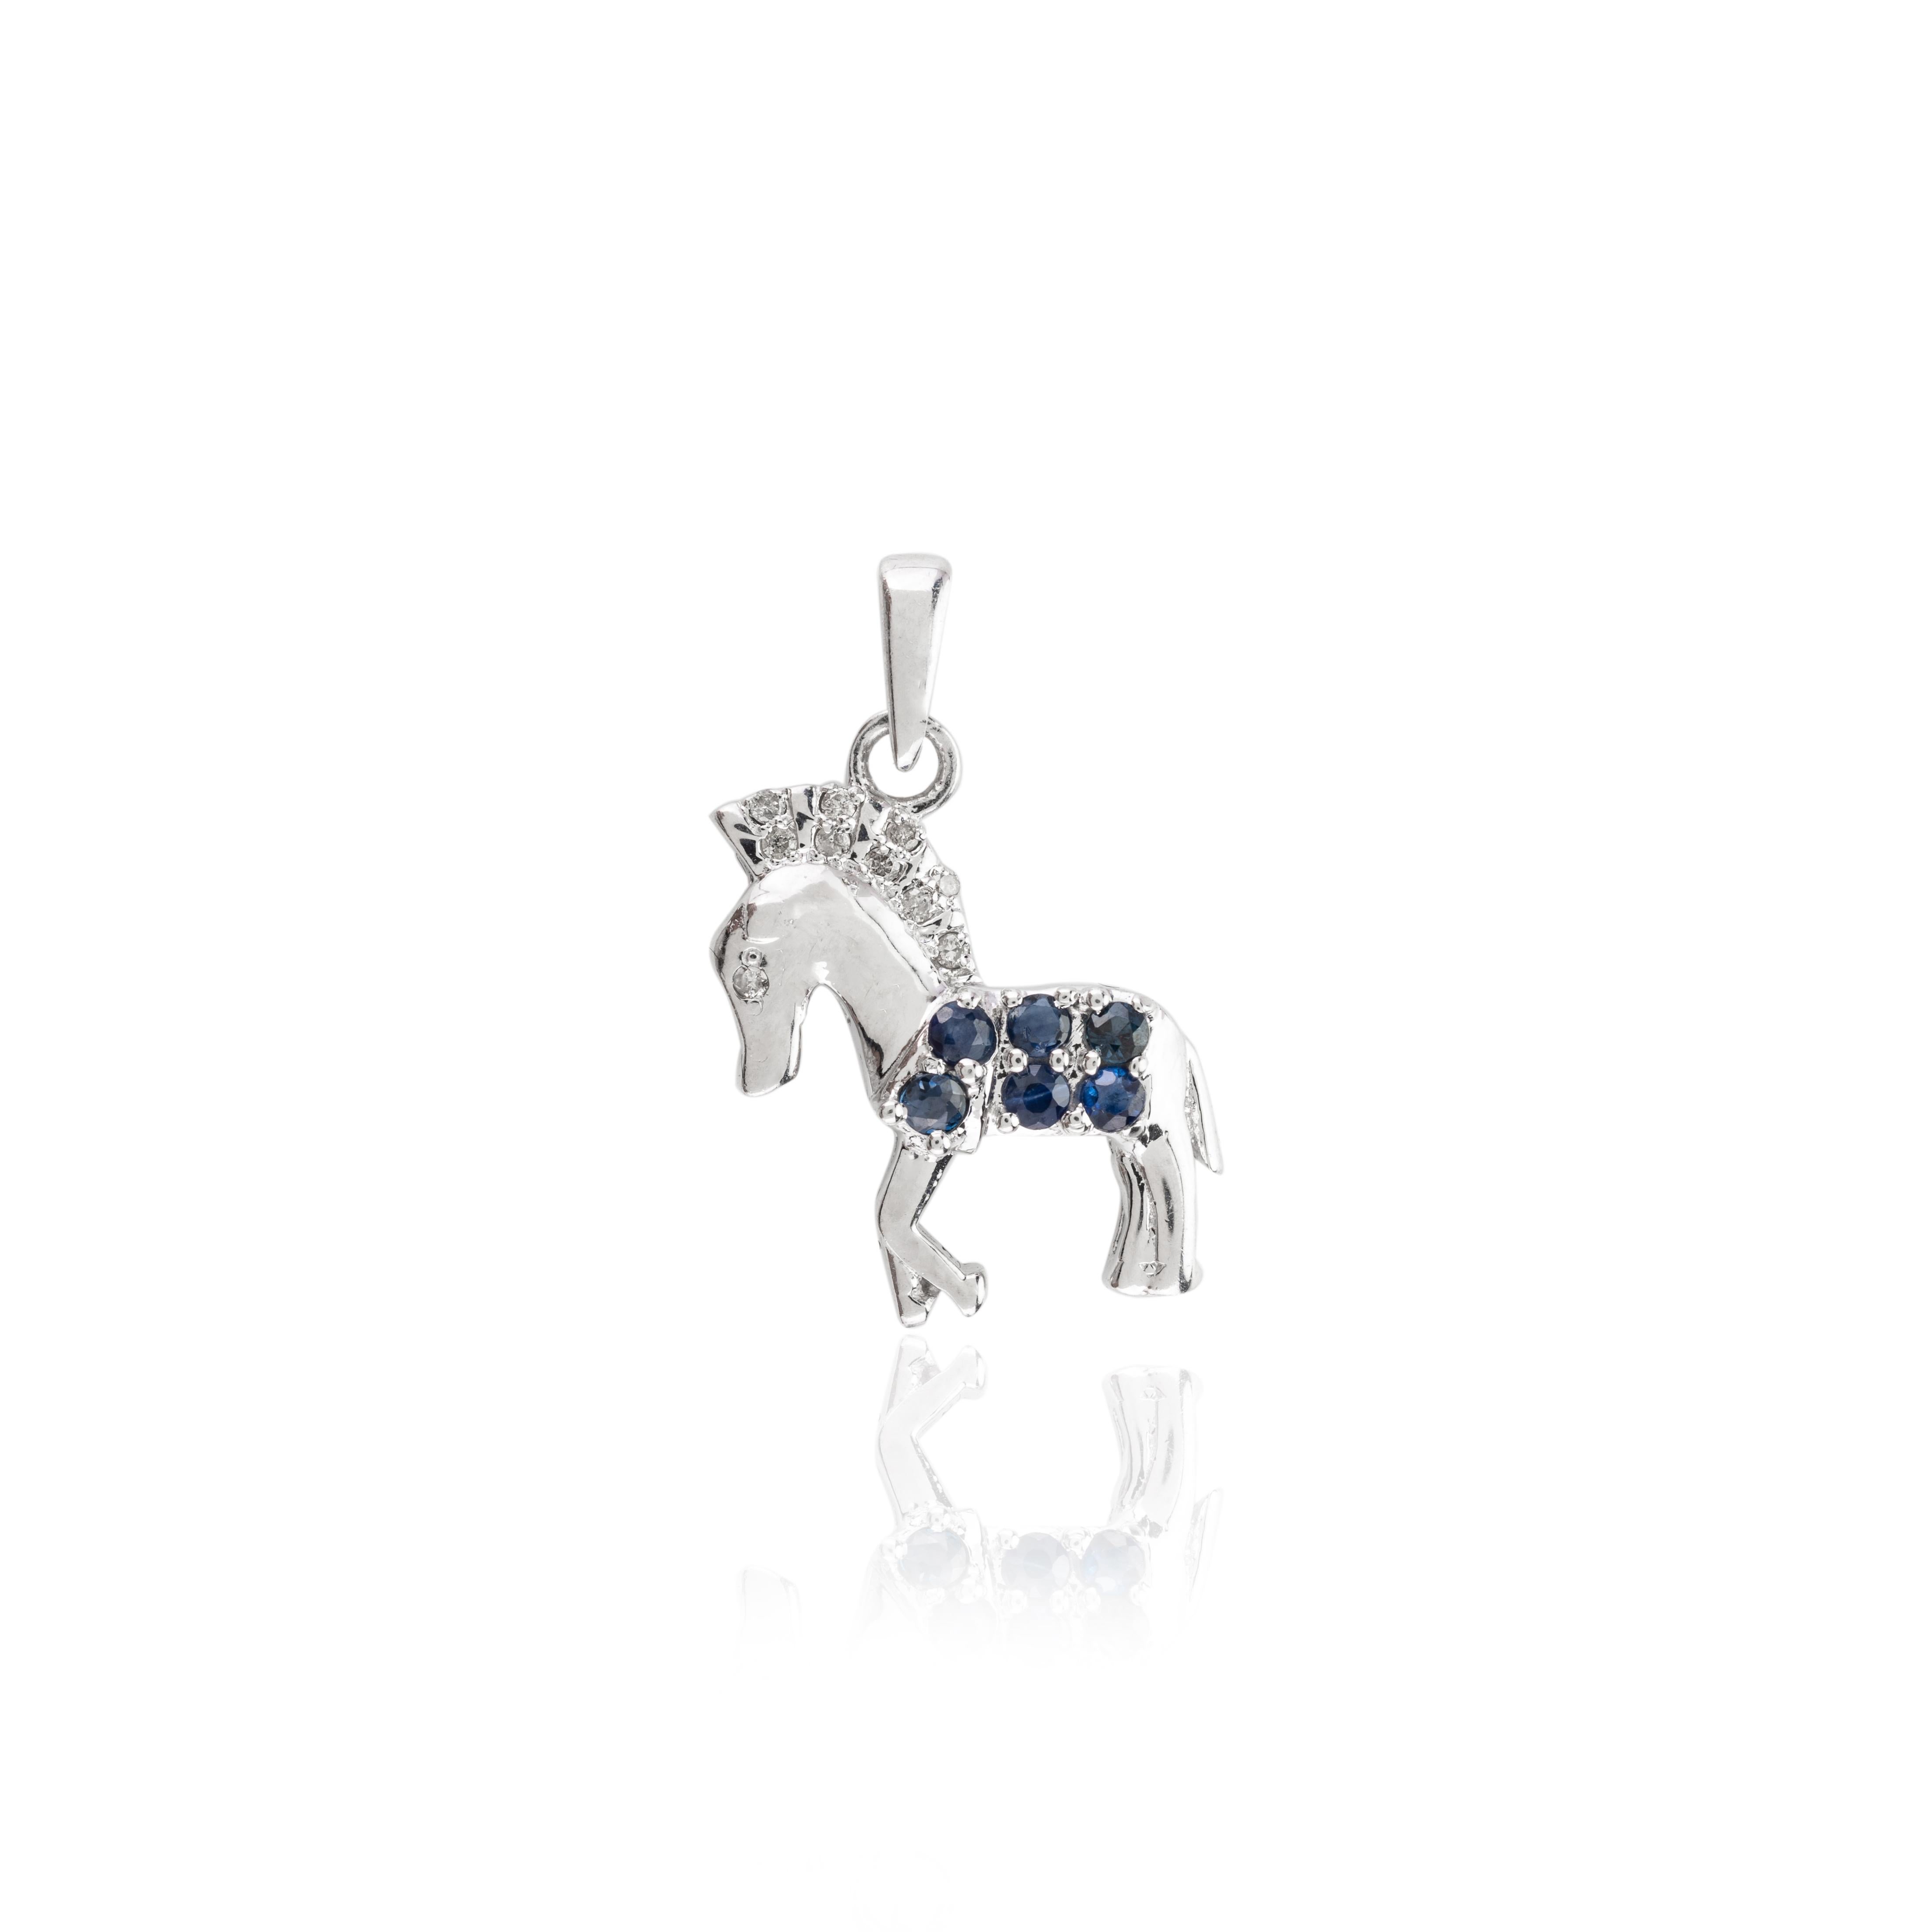 Women's 925 Sterling Silver Blue Sapphire Diamond Horse Pendant Unisex Gifts For Sale